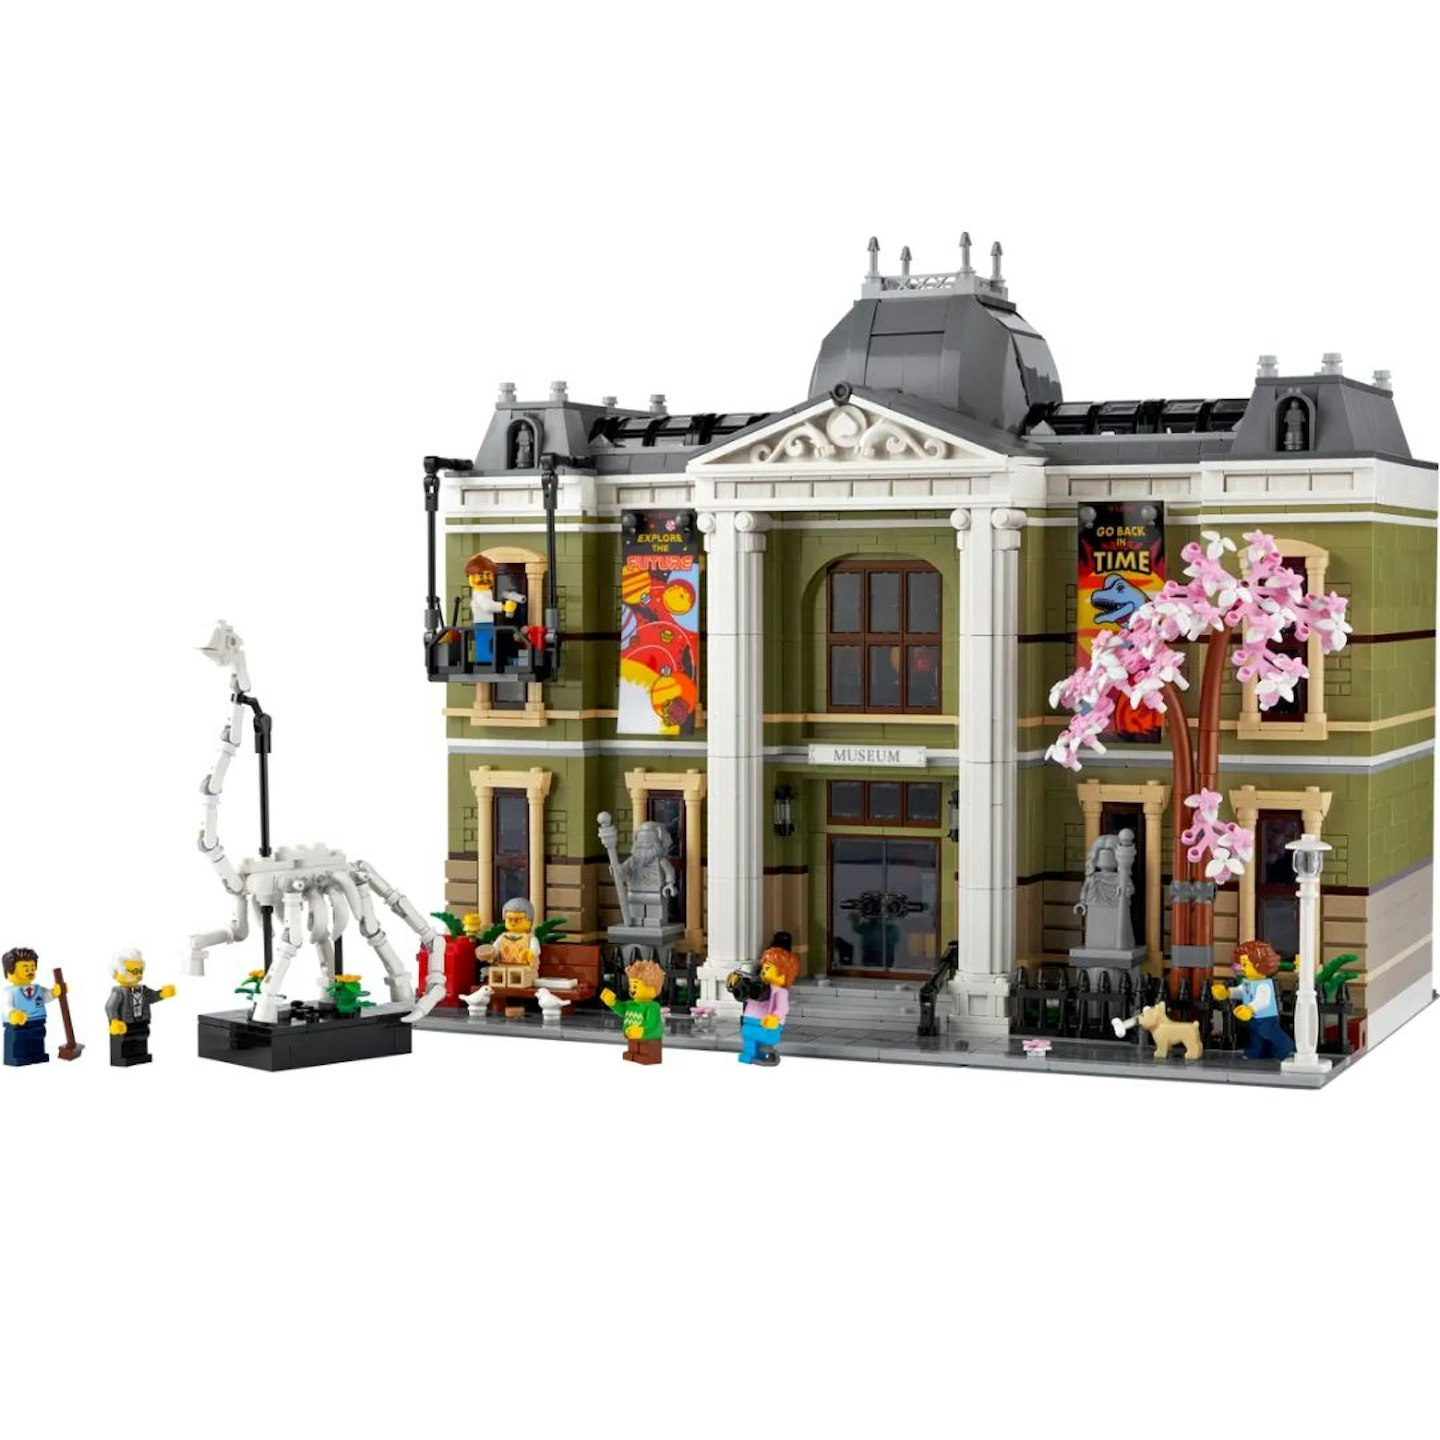 The best LEGO sets for adults: Natural History Museum